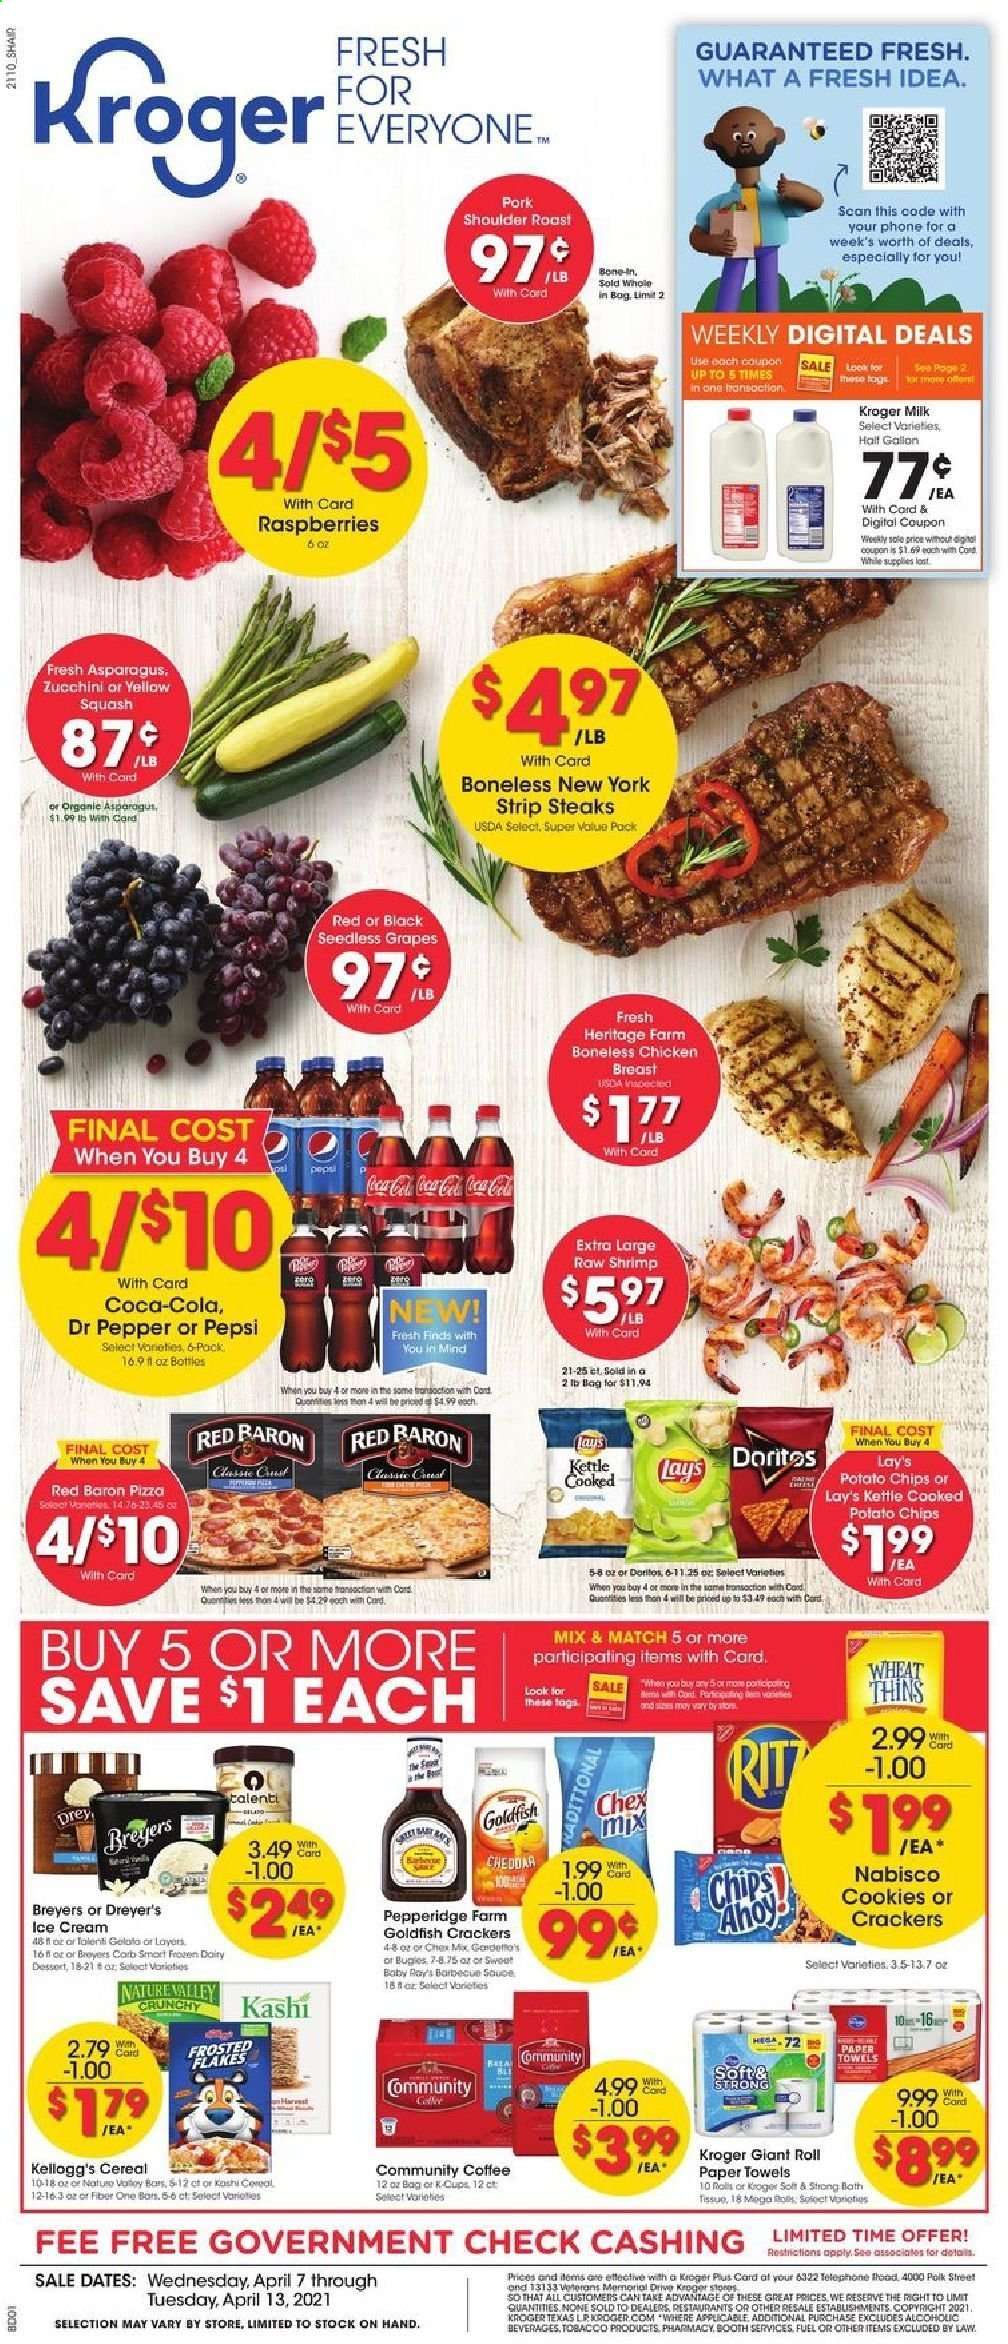 thumbnail - Kroger Flyer - 04/07/2021 - 04/13/2021 - Sales products - seedless grapes, asparagus, zucchini, grapes, raspberries, shrimps, pizza, milk, ice cream, Talenti Gelato, Red Baron, cookies, crackers, Kellogg's, Doritos, potato chips, chips, Lay’s, Thins, Goldfish, Chex Mix, Frosted Flakes, Nature Valley, Fiber One, Coca-Cola, Pepsi, Dr. Pepper, coffee, L'Or, sake, chicken breasts, beef meat, steak, striploin steak, kitchen towels, paper towels. Page 1.